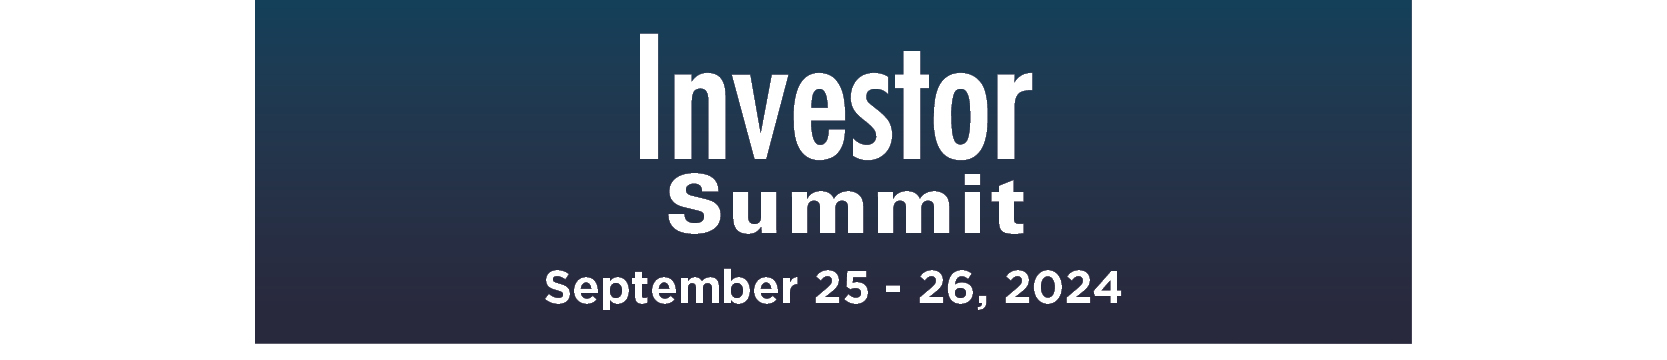 HR Technology Innovation Summit -  included in Investor Package